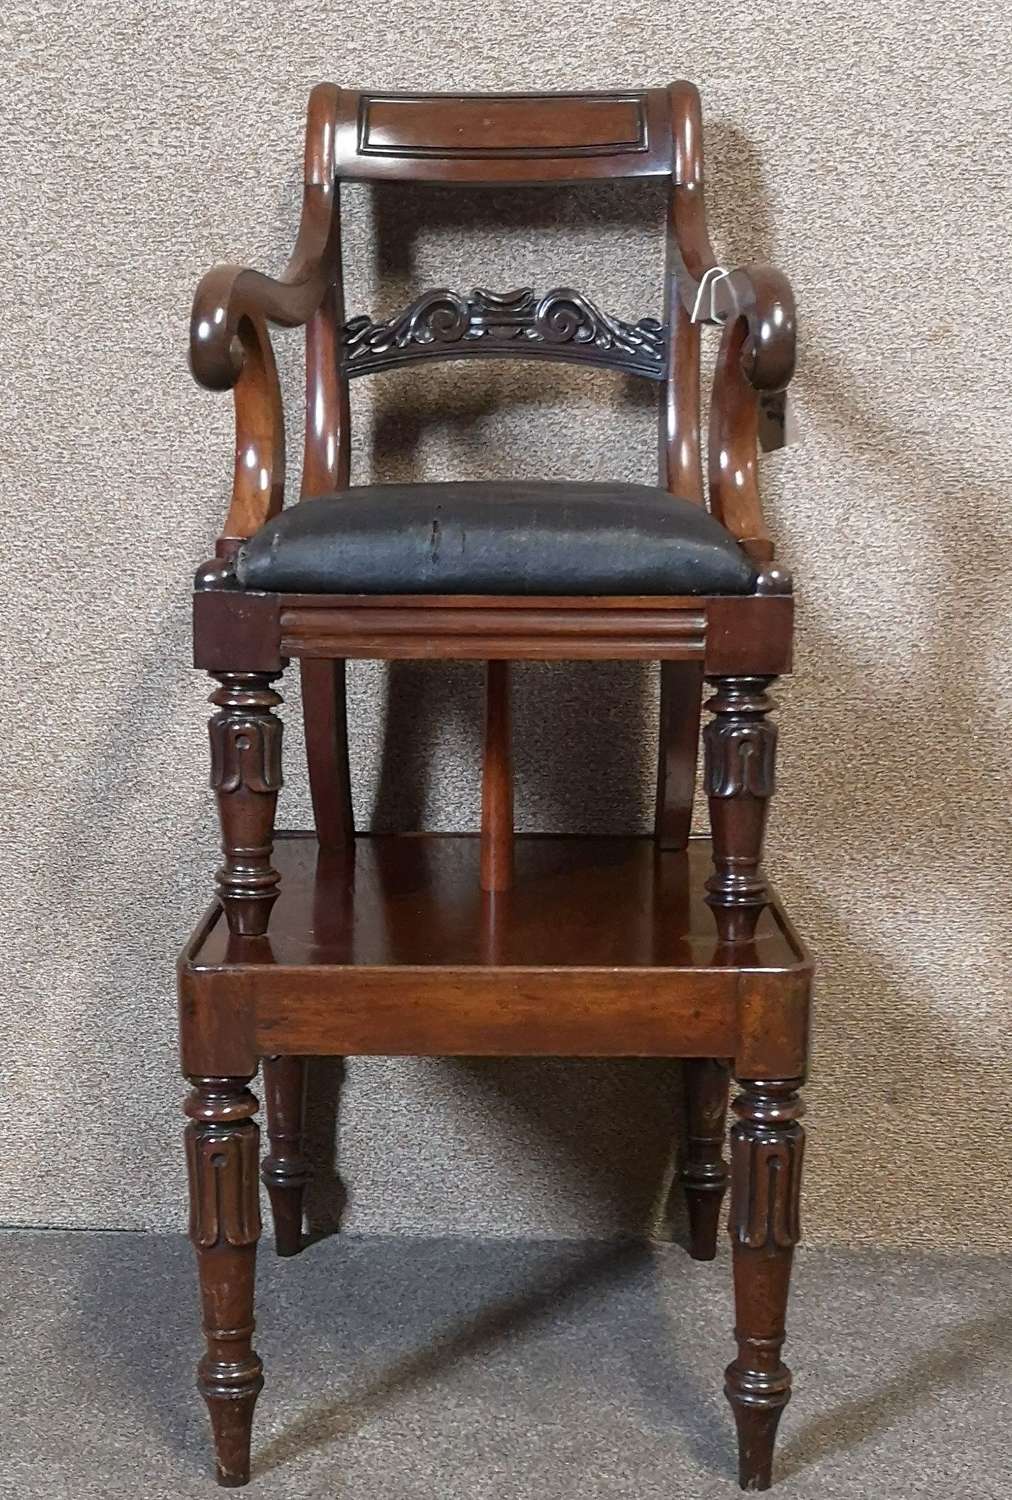 Regency Mahogany Childs Chair On Stand